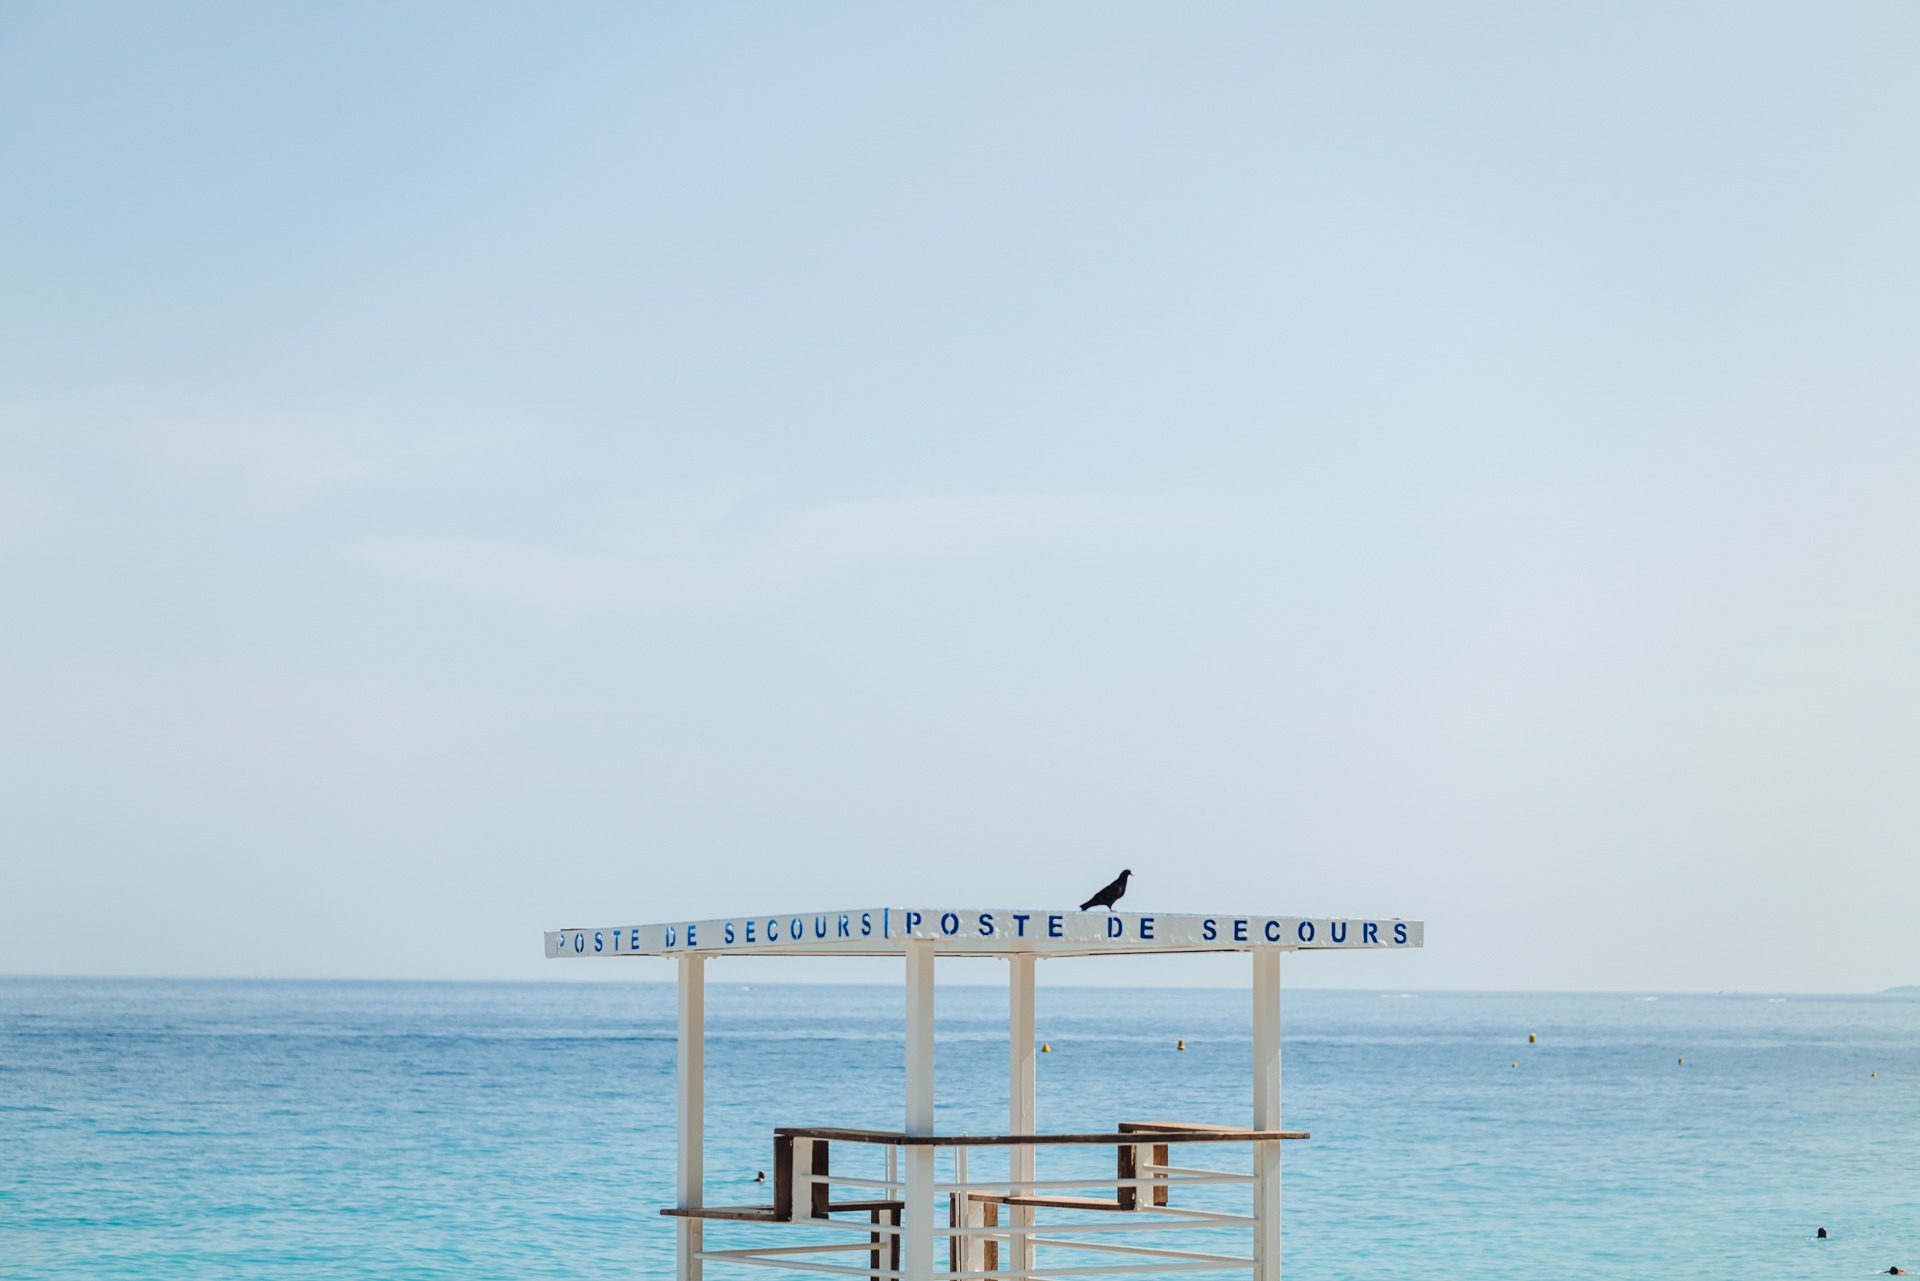 Nice, France-June 2022: A pigeon on the life guard structure on